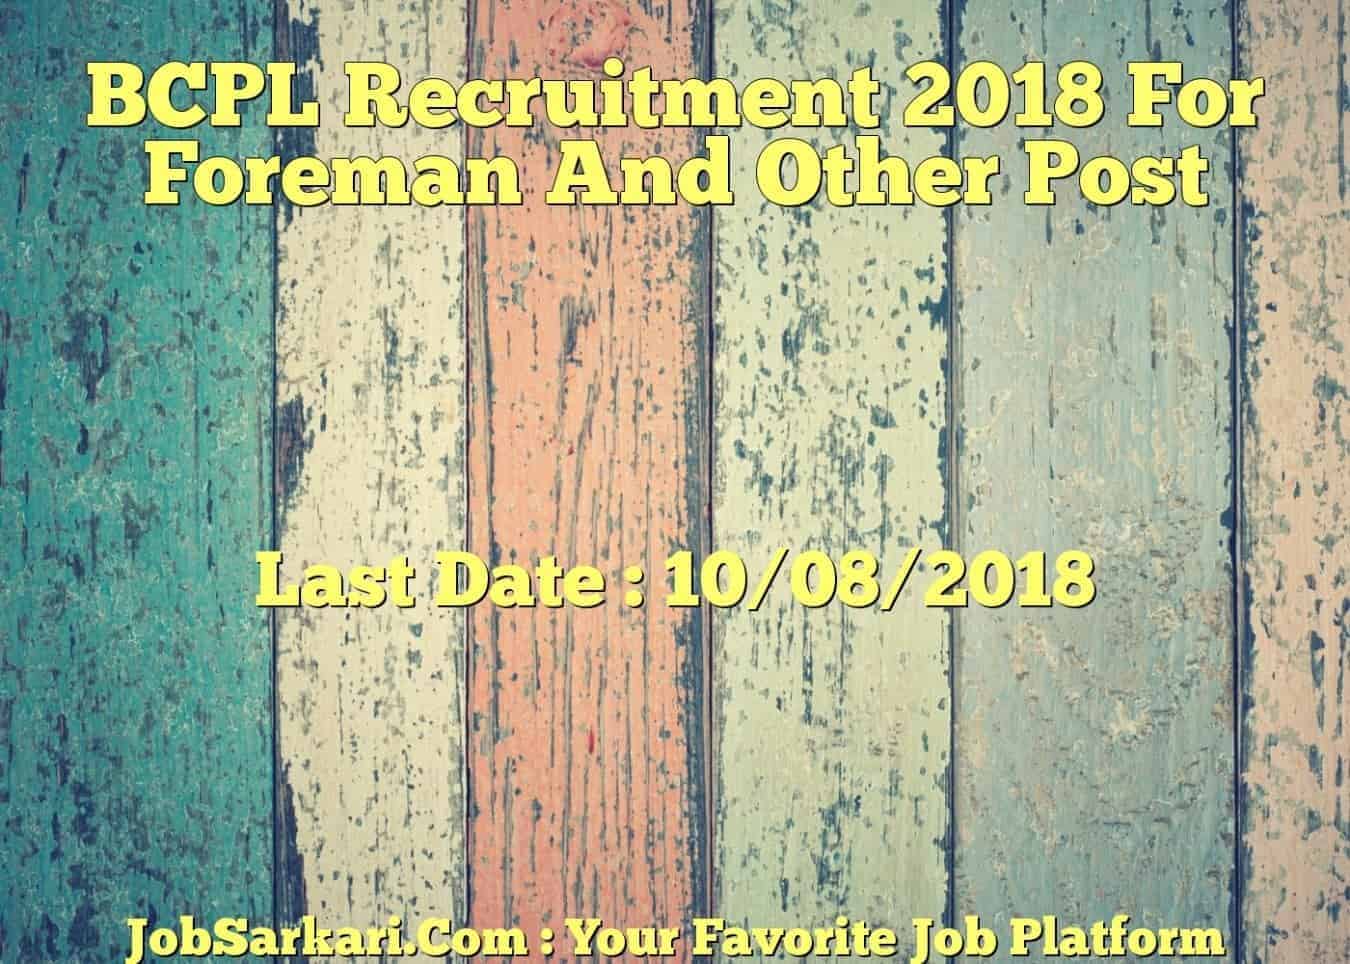 BCPL Recruitment 2018 For Foreman And Other Post